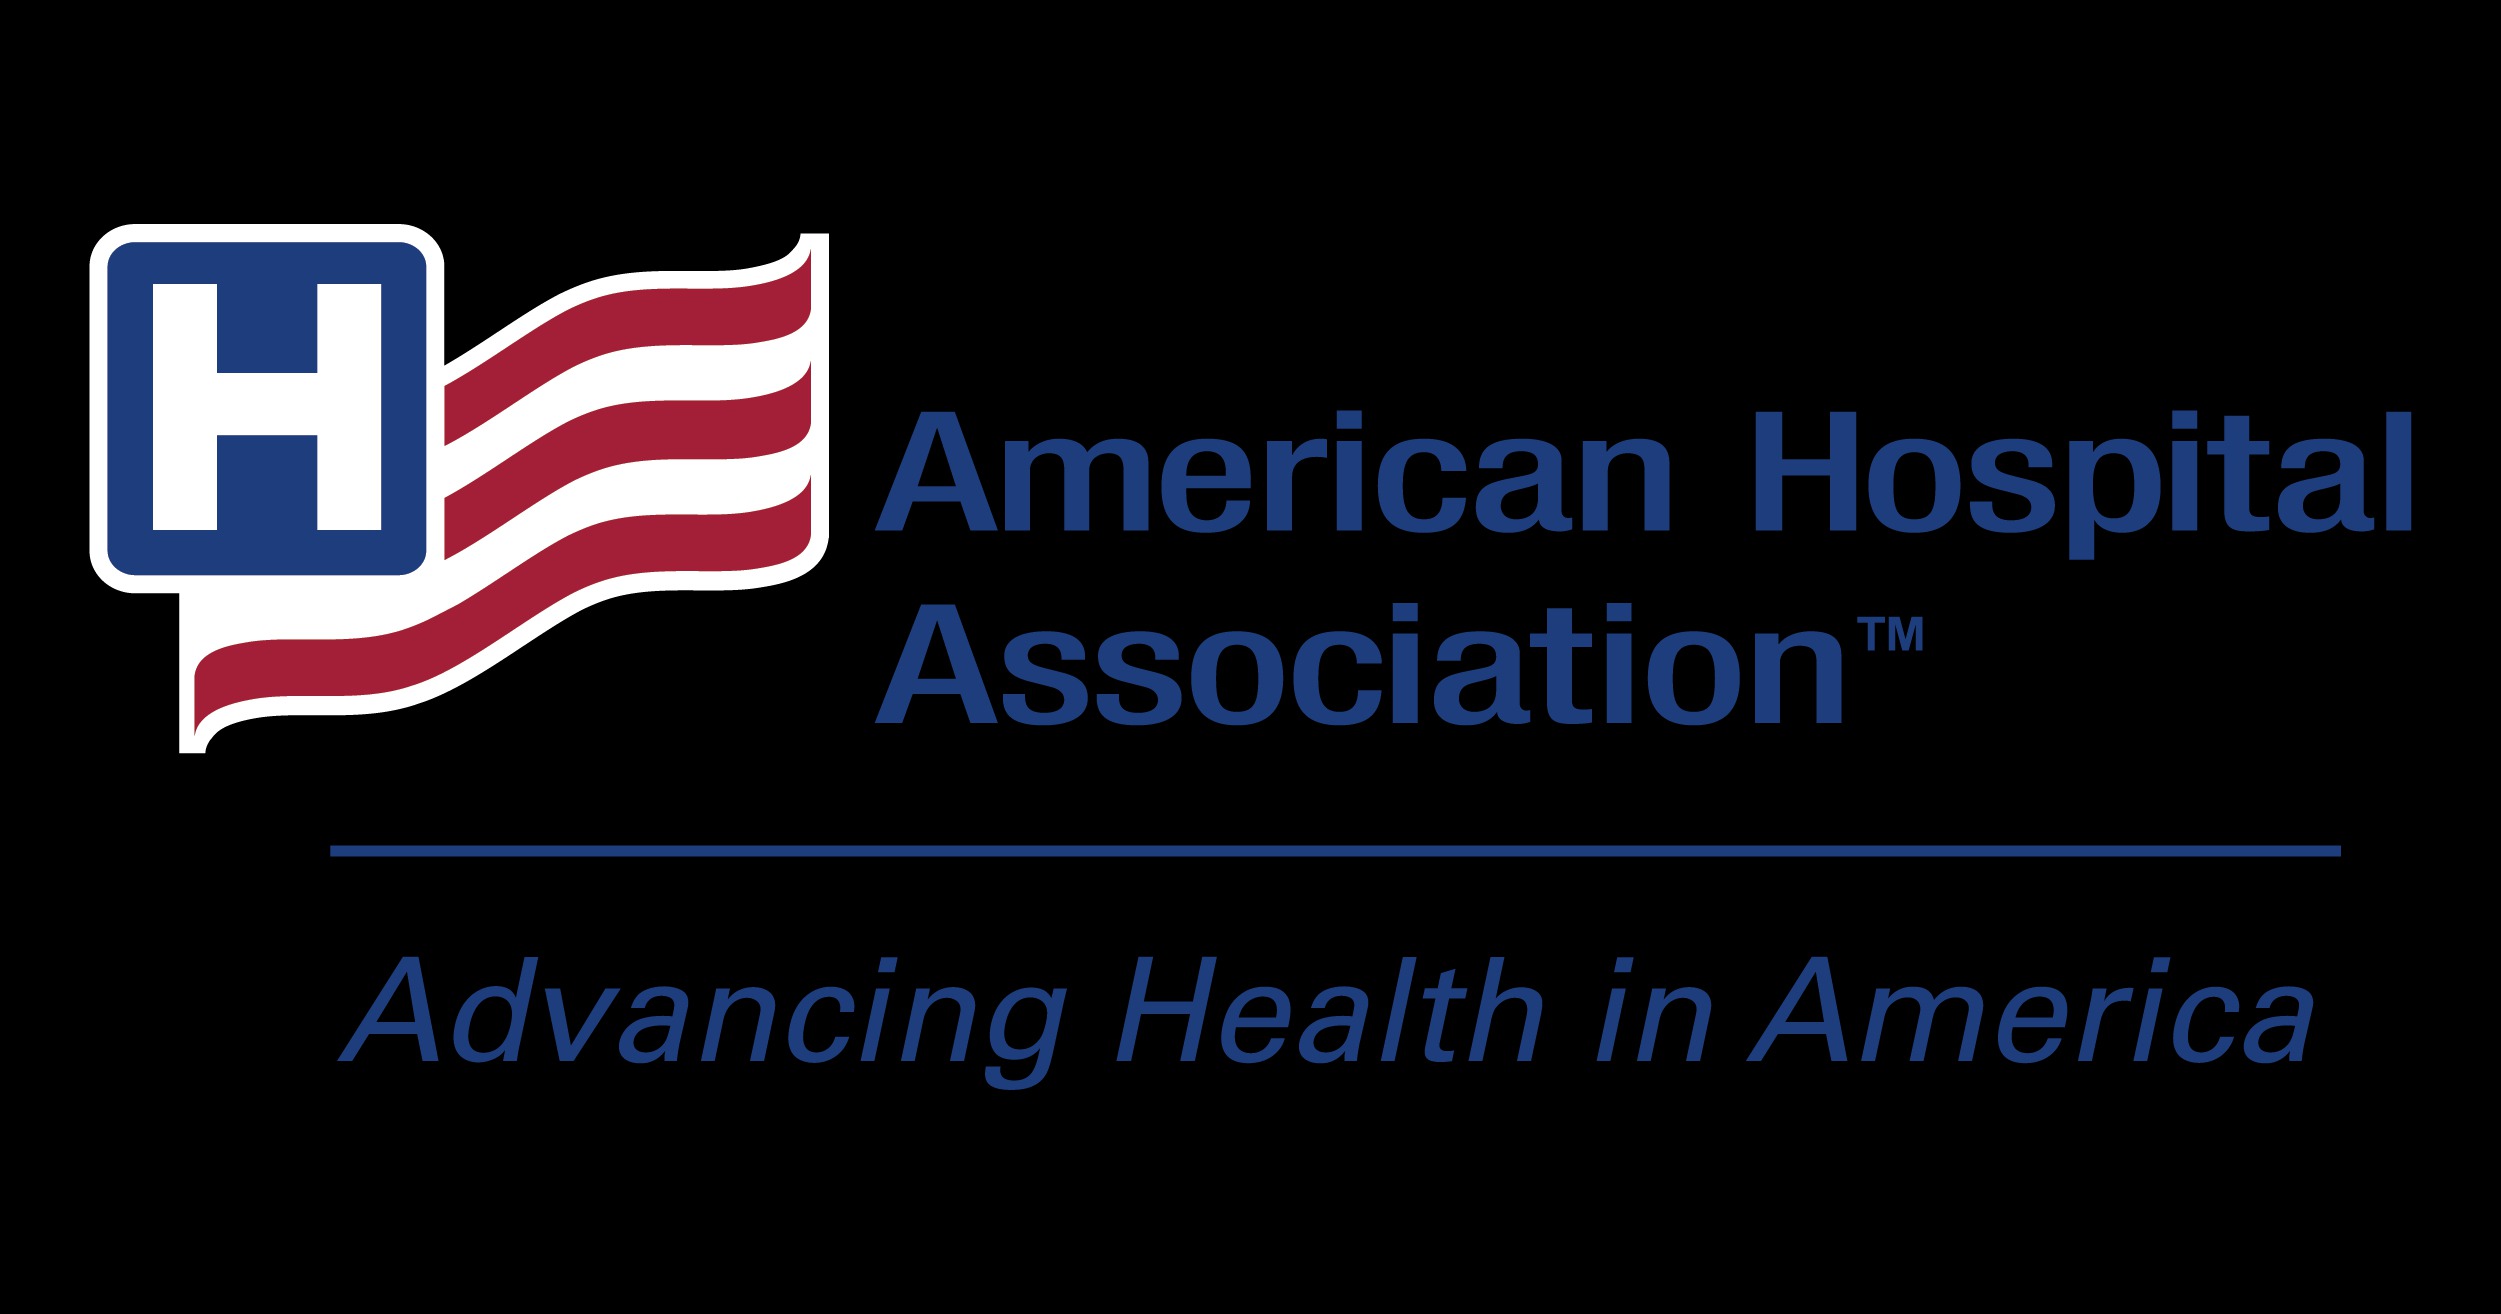 AHA House Statement on Enhancing Access to Care at Home in Rural and Underserved Communities